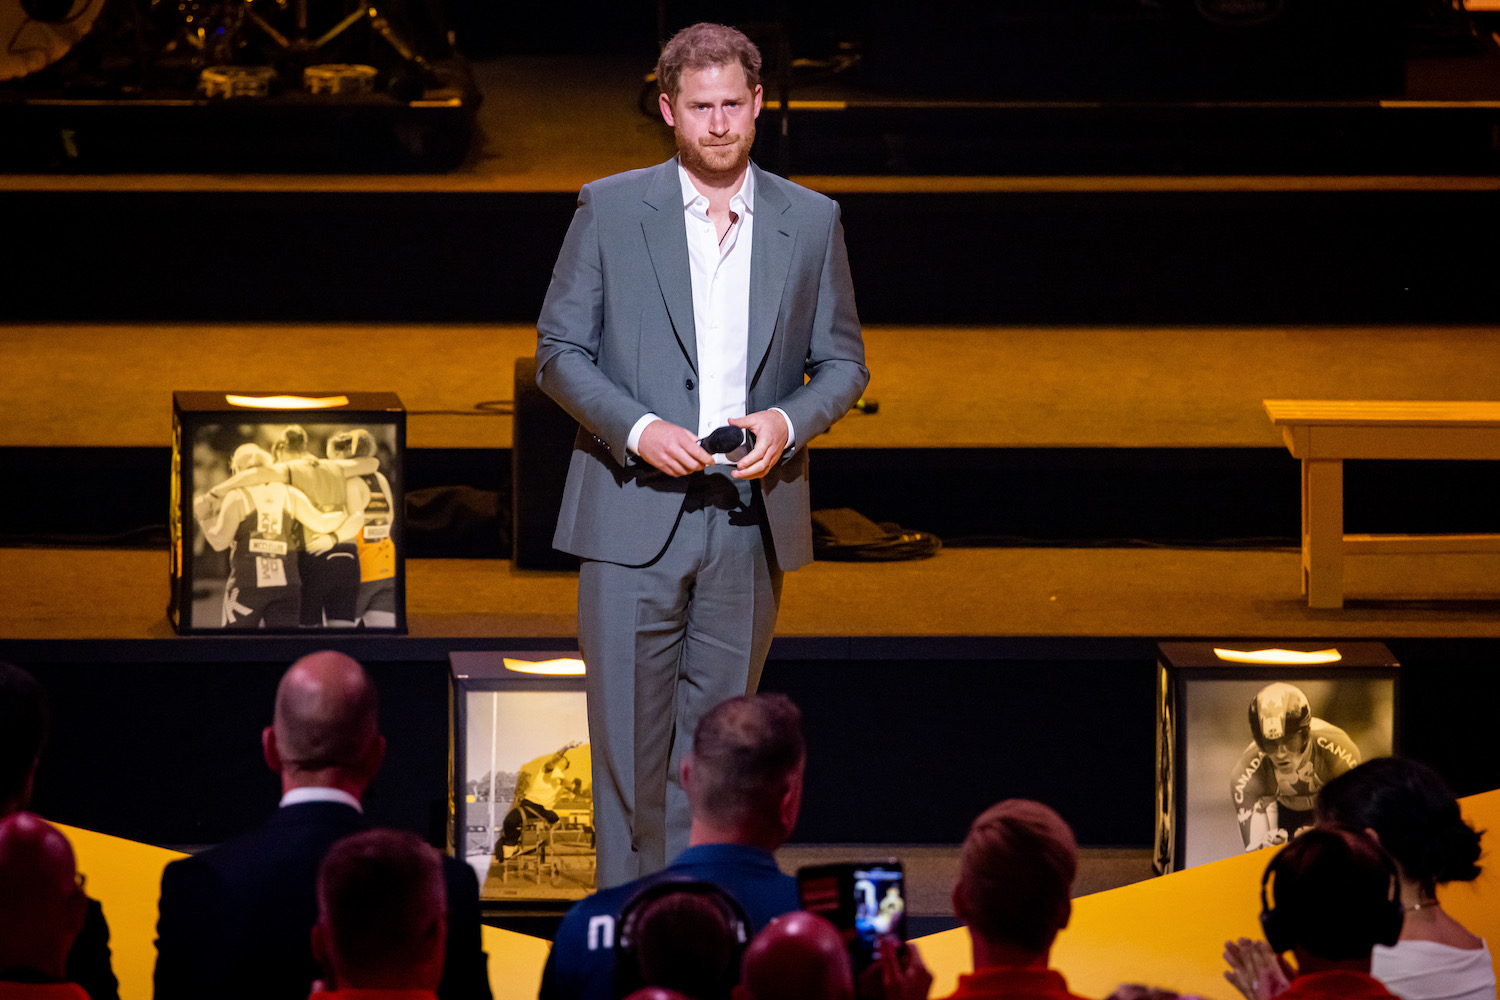 Prince Harry wears a gray shirt and looks emotional at the 2022 Invictus Games opening ceremony